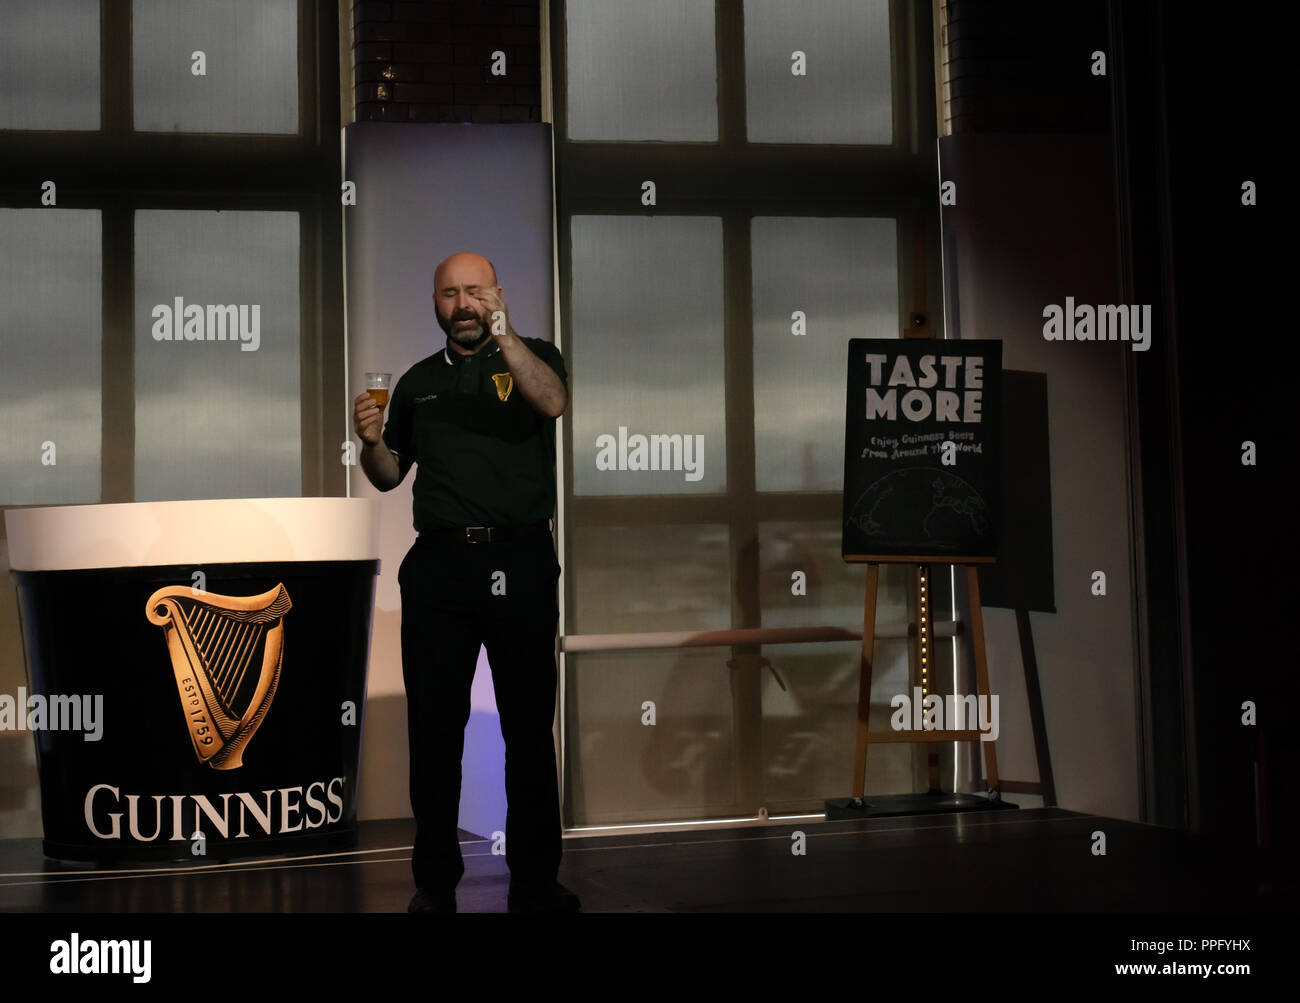 Live show at Guinness Storehouse Dublin as presenter demonstrates on stage the Guinness Experience Dublin Ireland Stock Photo